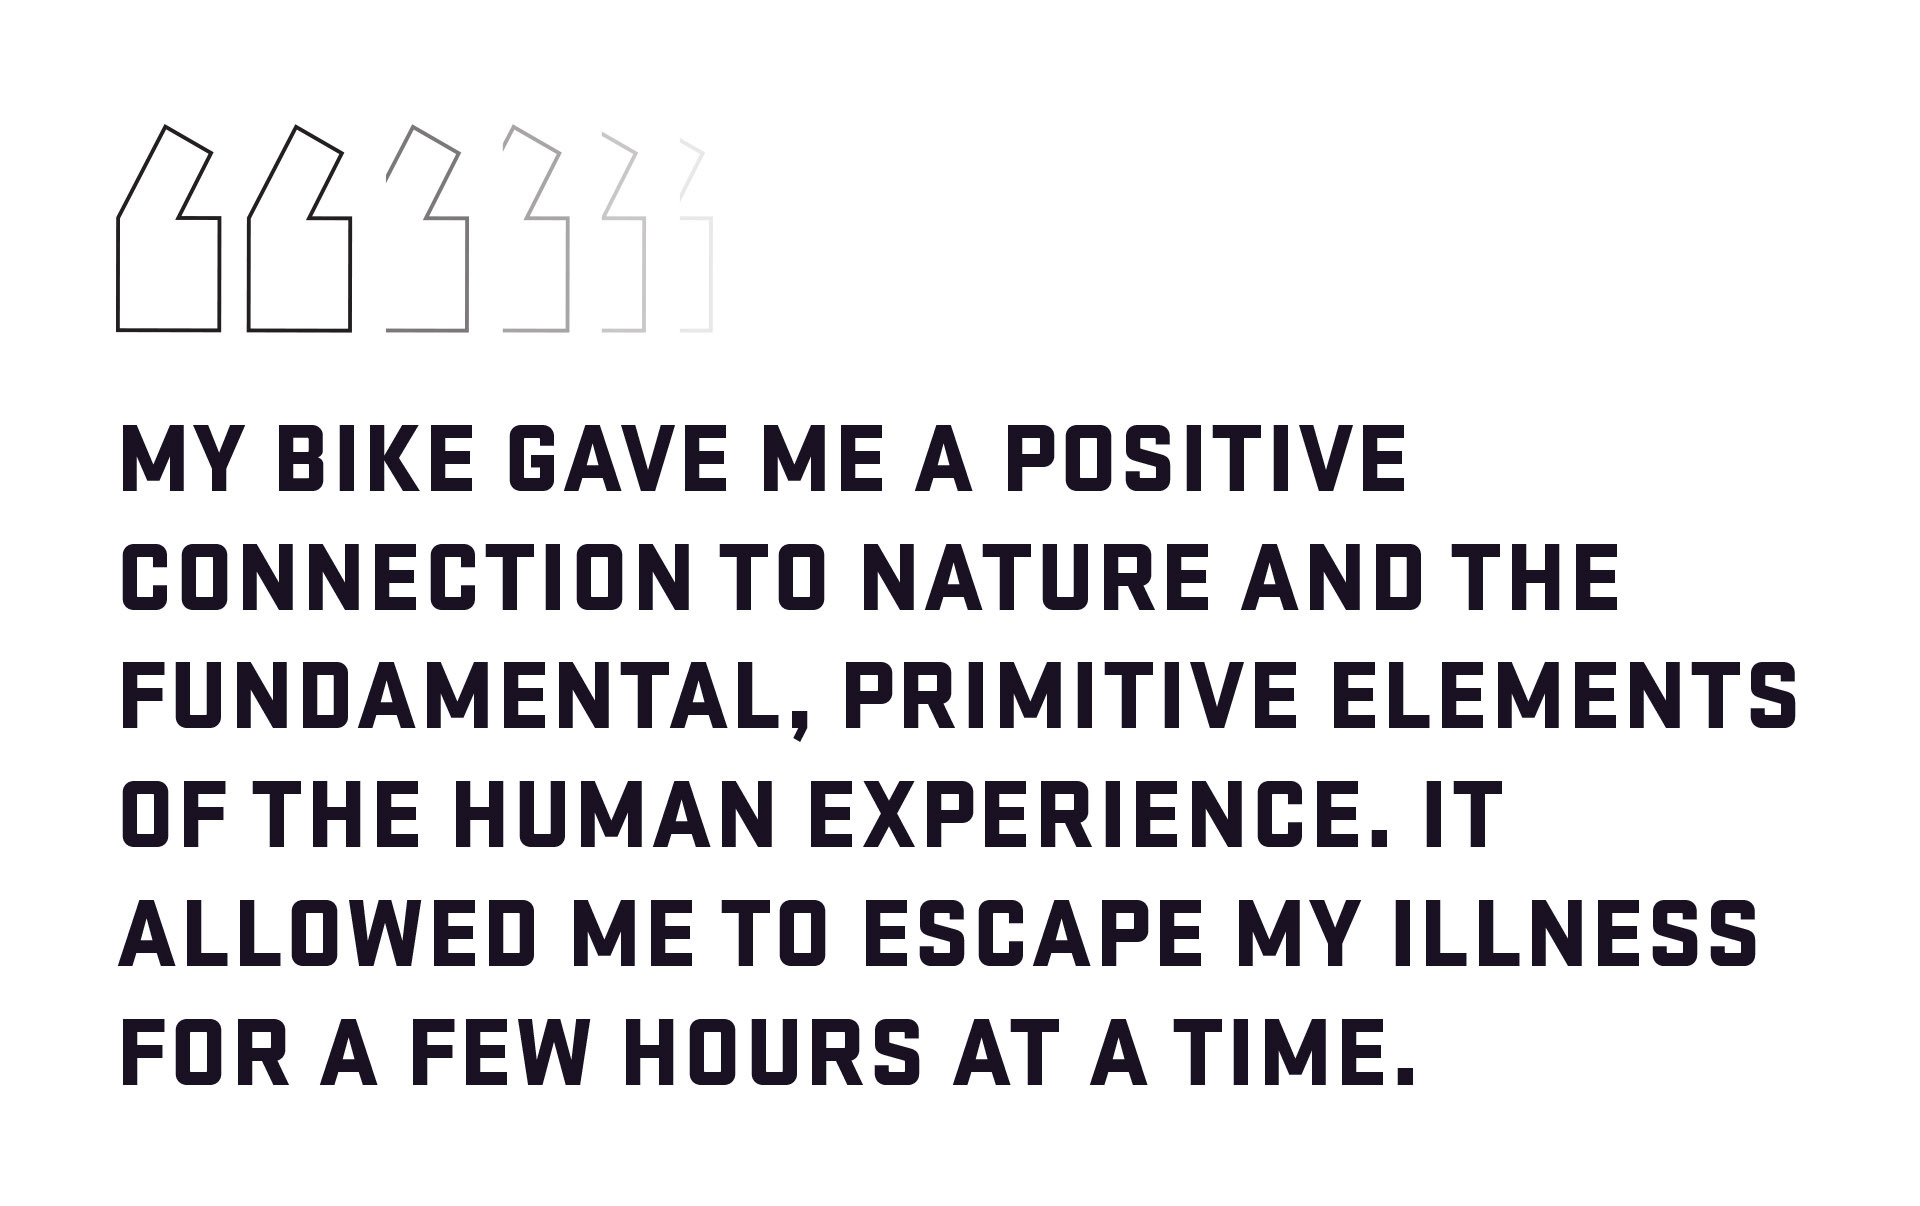 Block quote: My bike gave me a positive connection to nature and the fundamental, primitive elements of the human experience. It allowed me to escape my illness for a few hours at a time. 